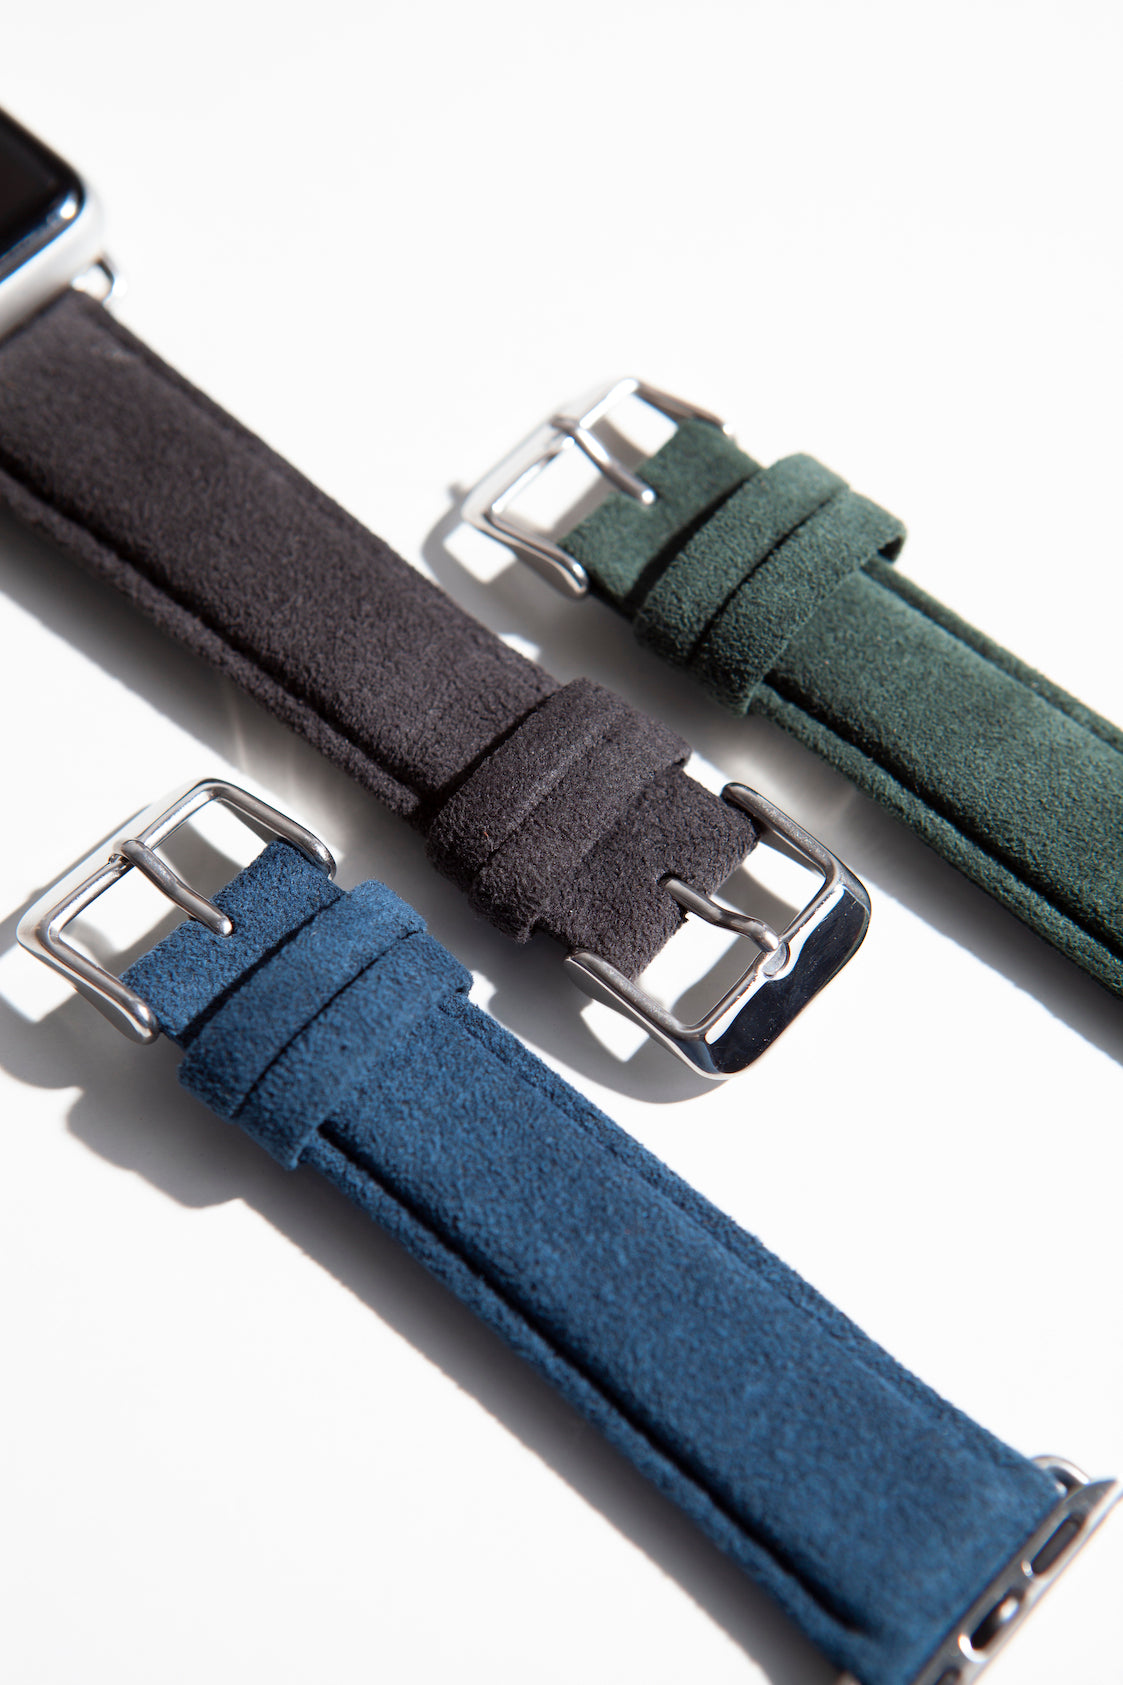 The Classic Apple Watch Band - Alcantara Suede Luriax Straps